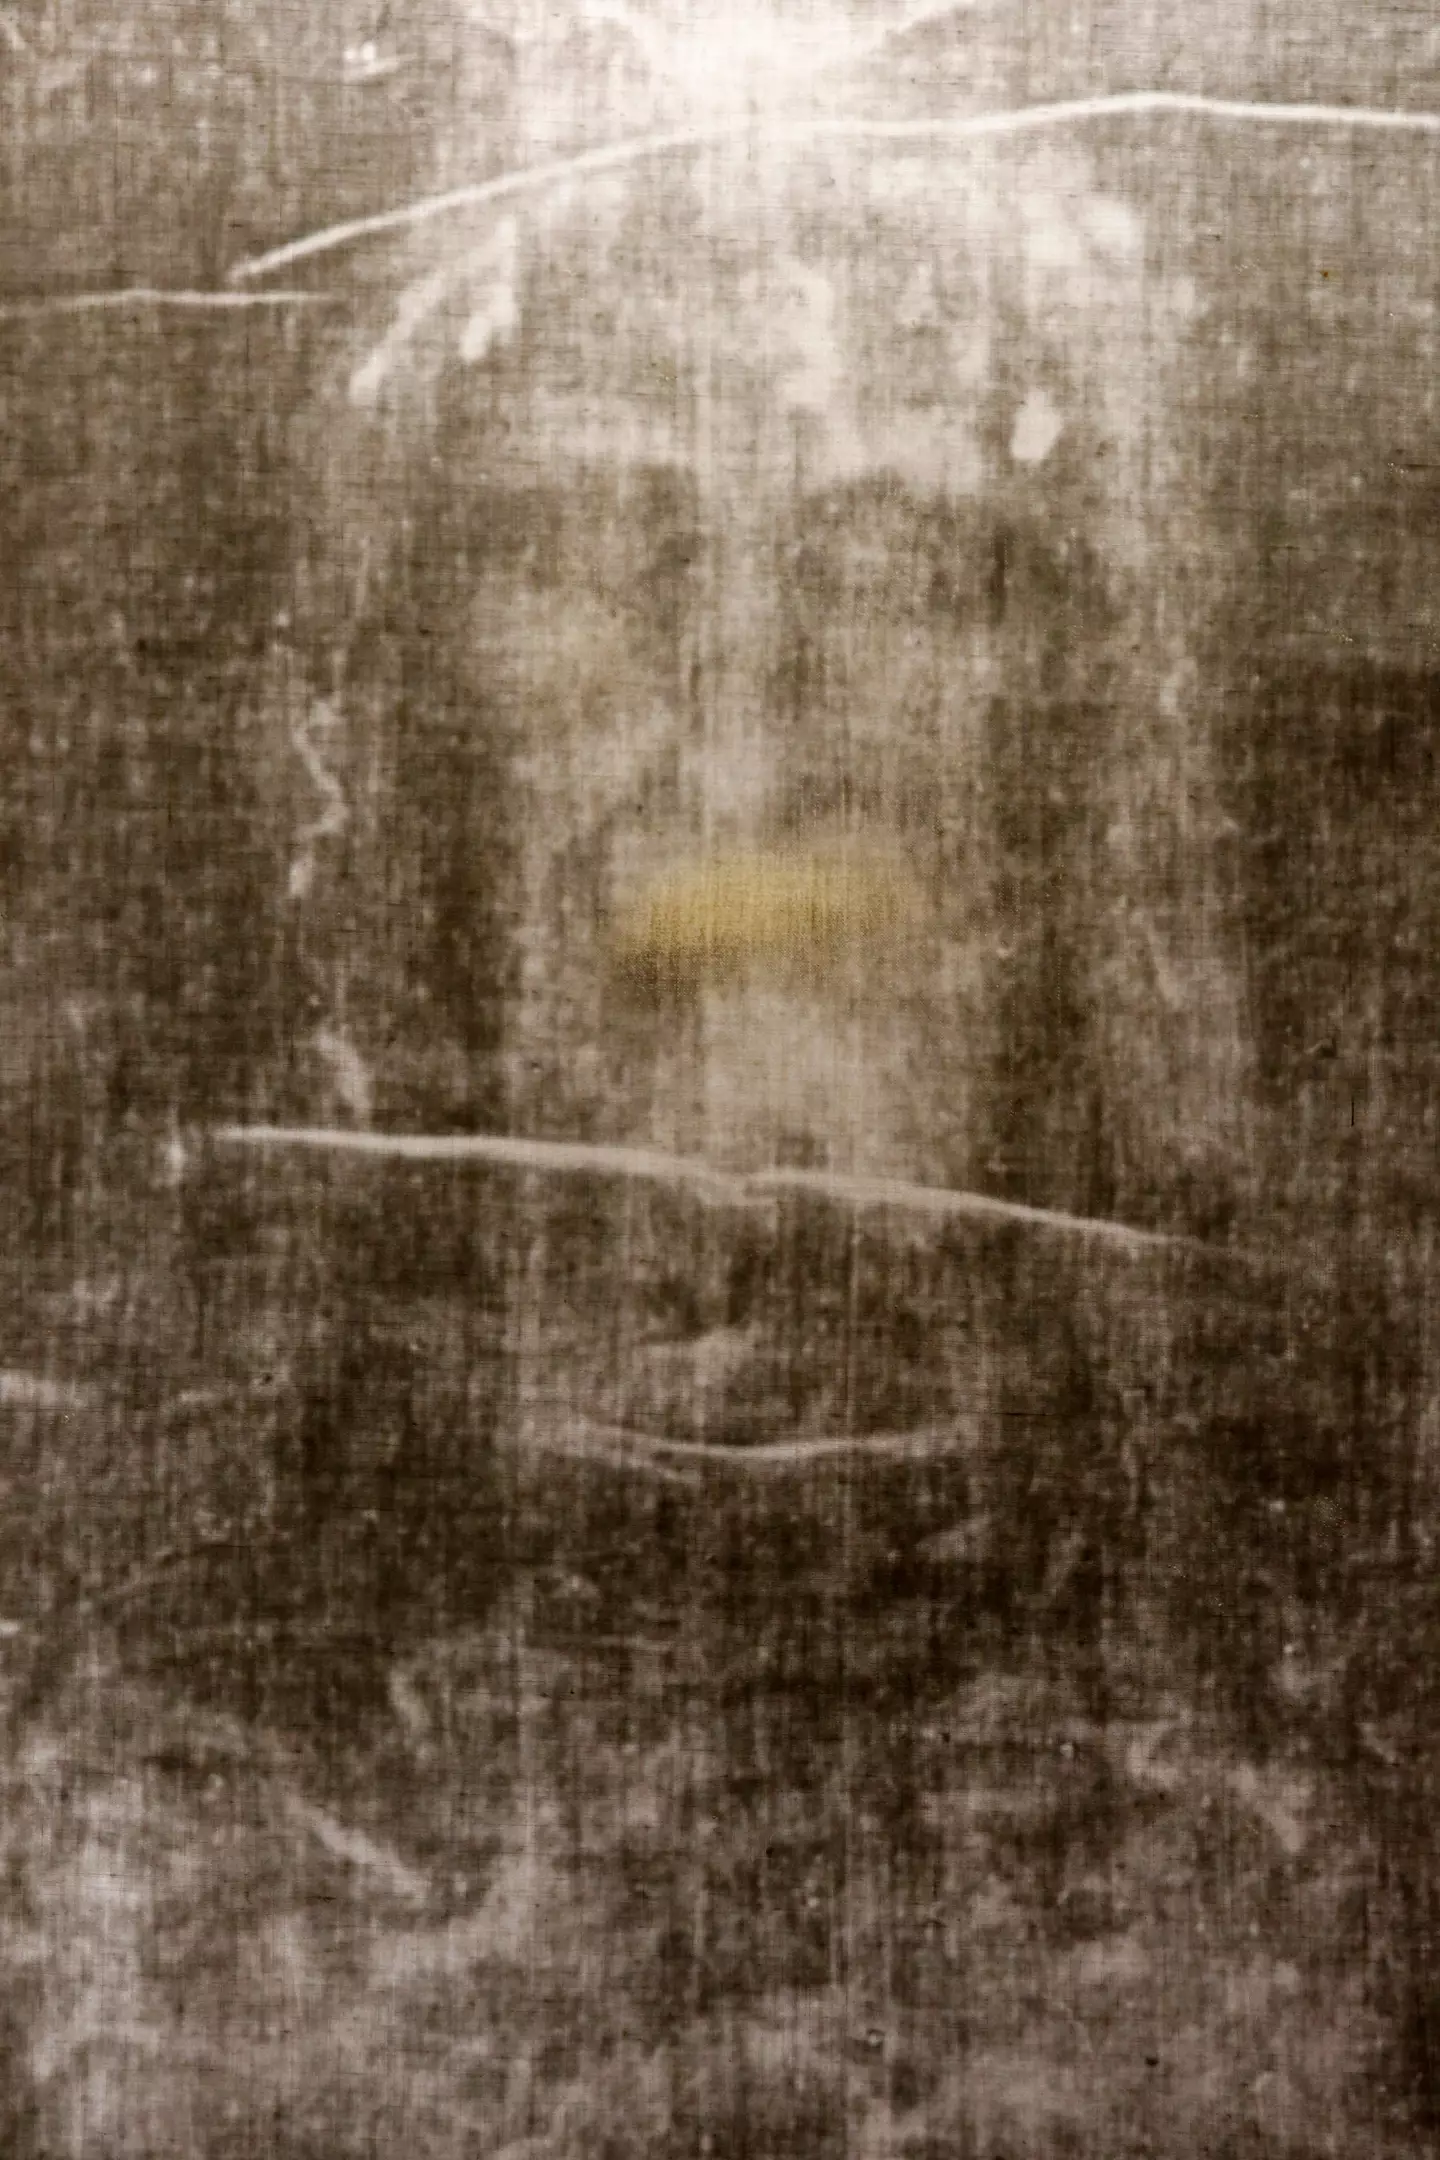 The image is clearer on black and white negatives, but experts have cast doubt on whether the cloth is old enough to have belonged to Jesus.